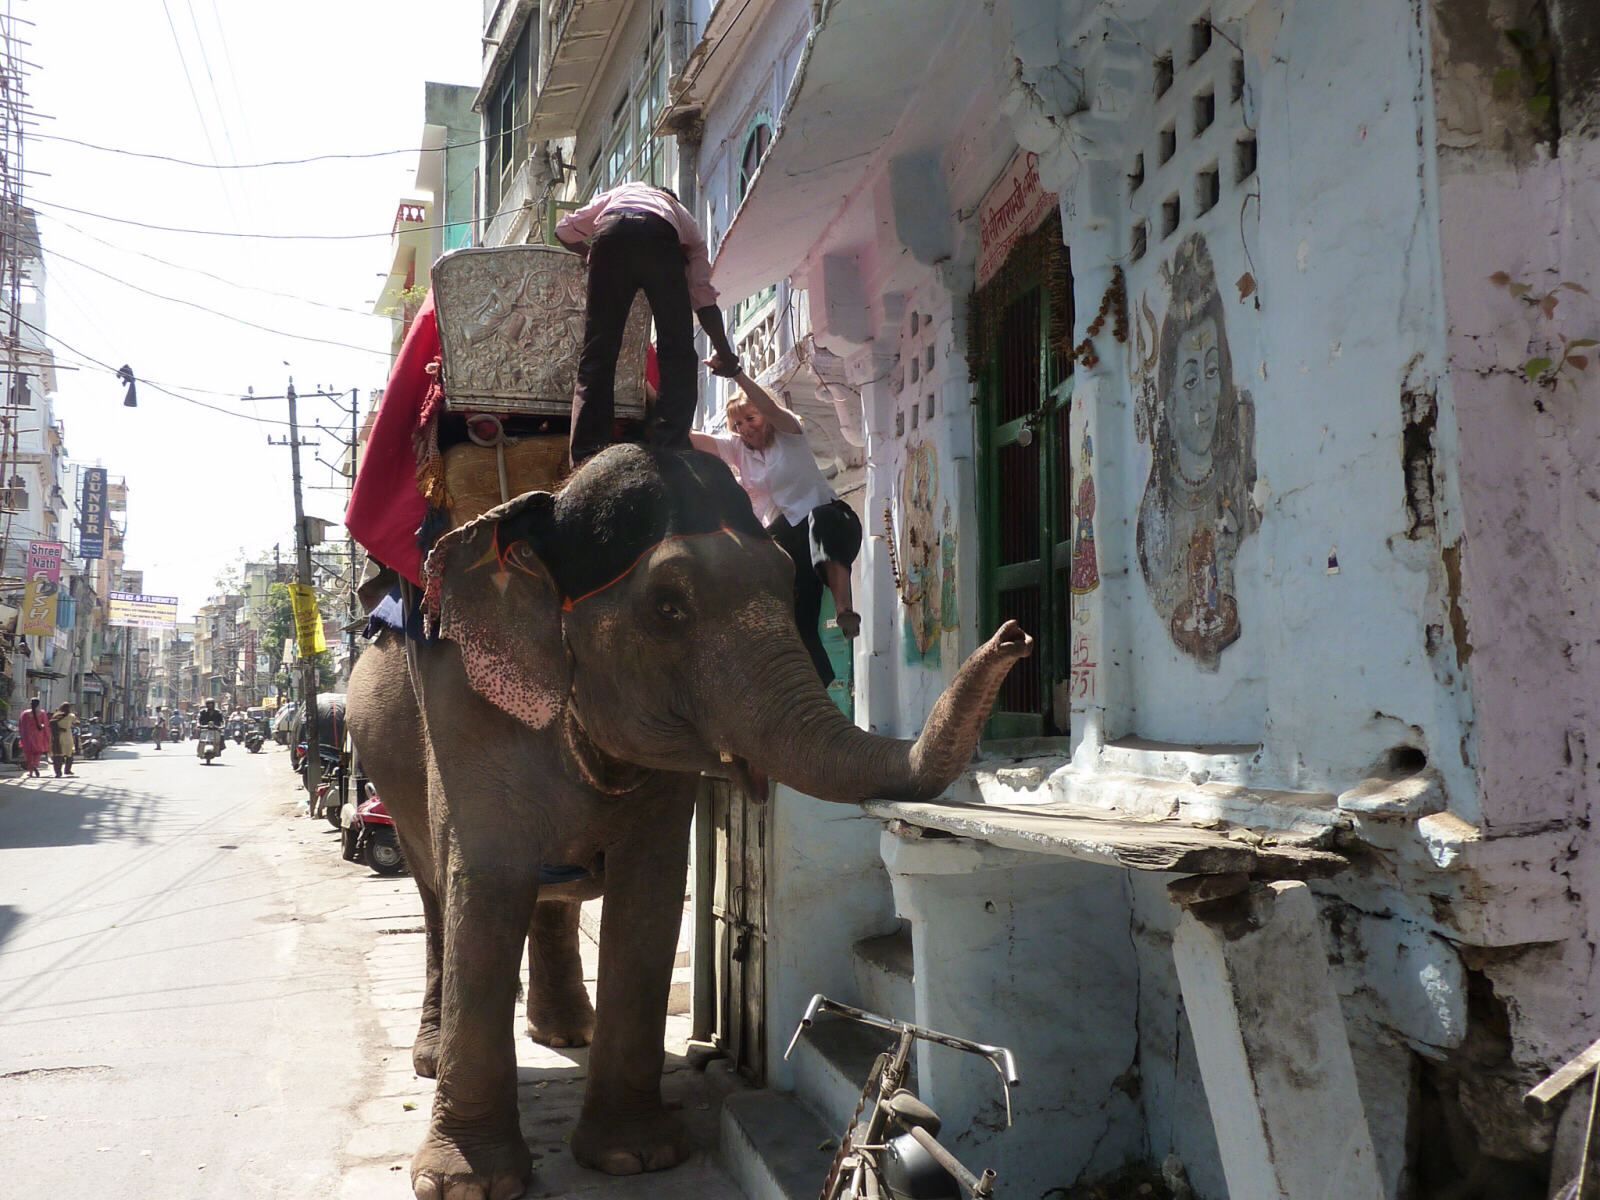 Ramu the elephant in a street in Udaipur, Rajasthan